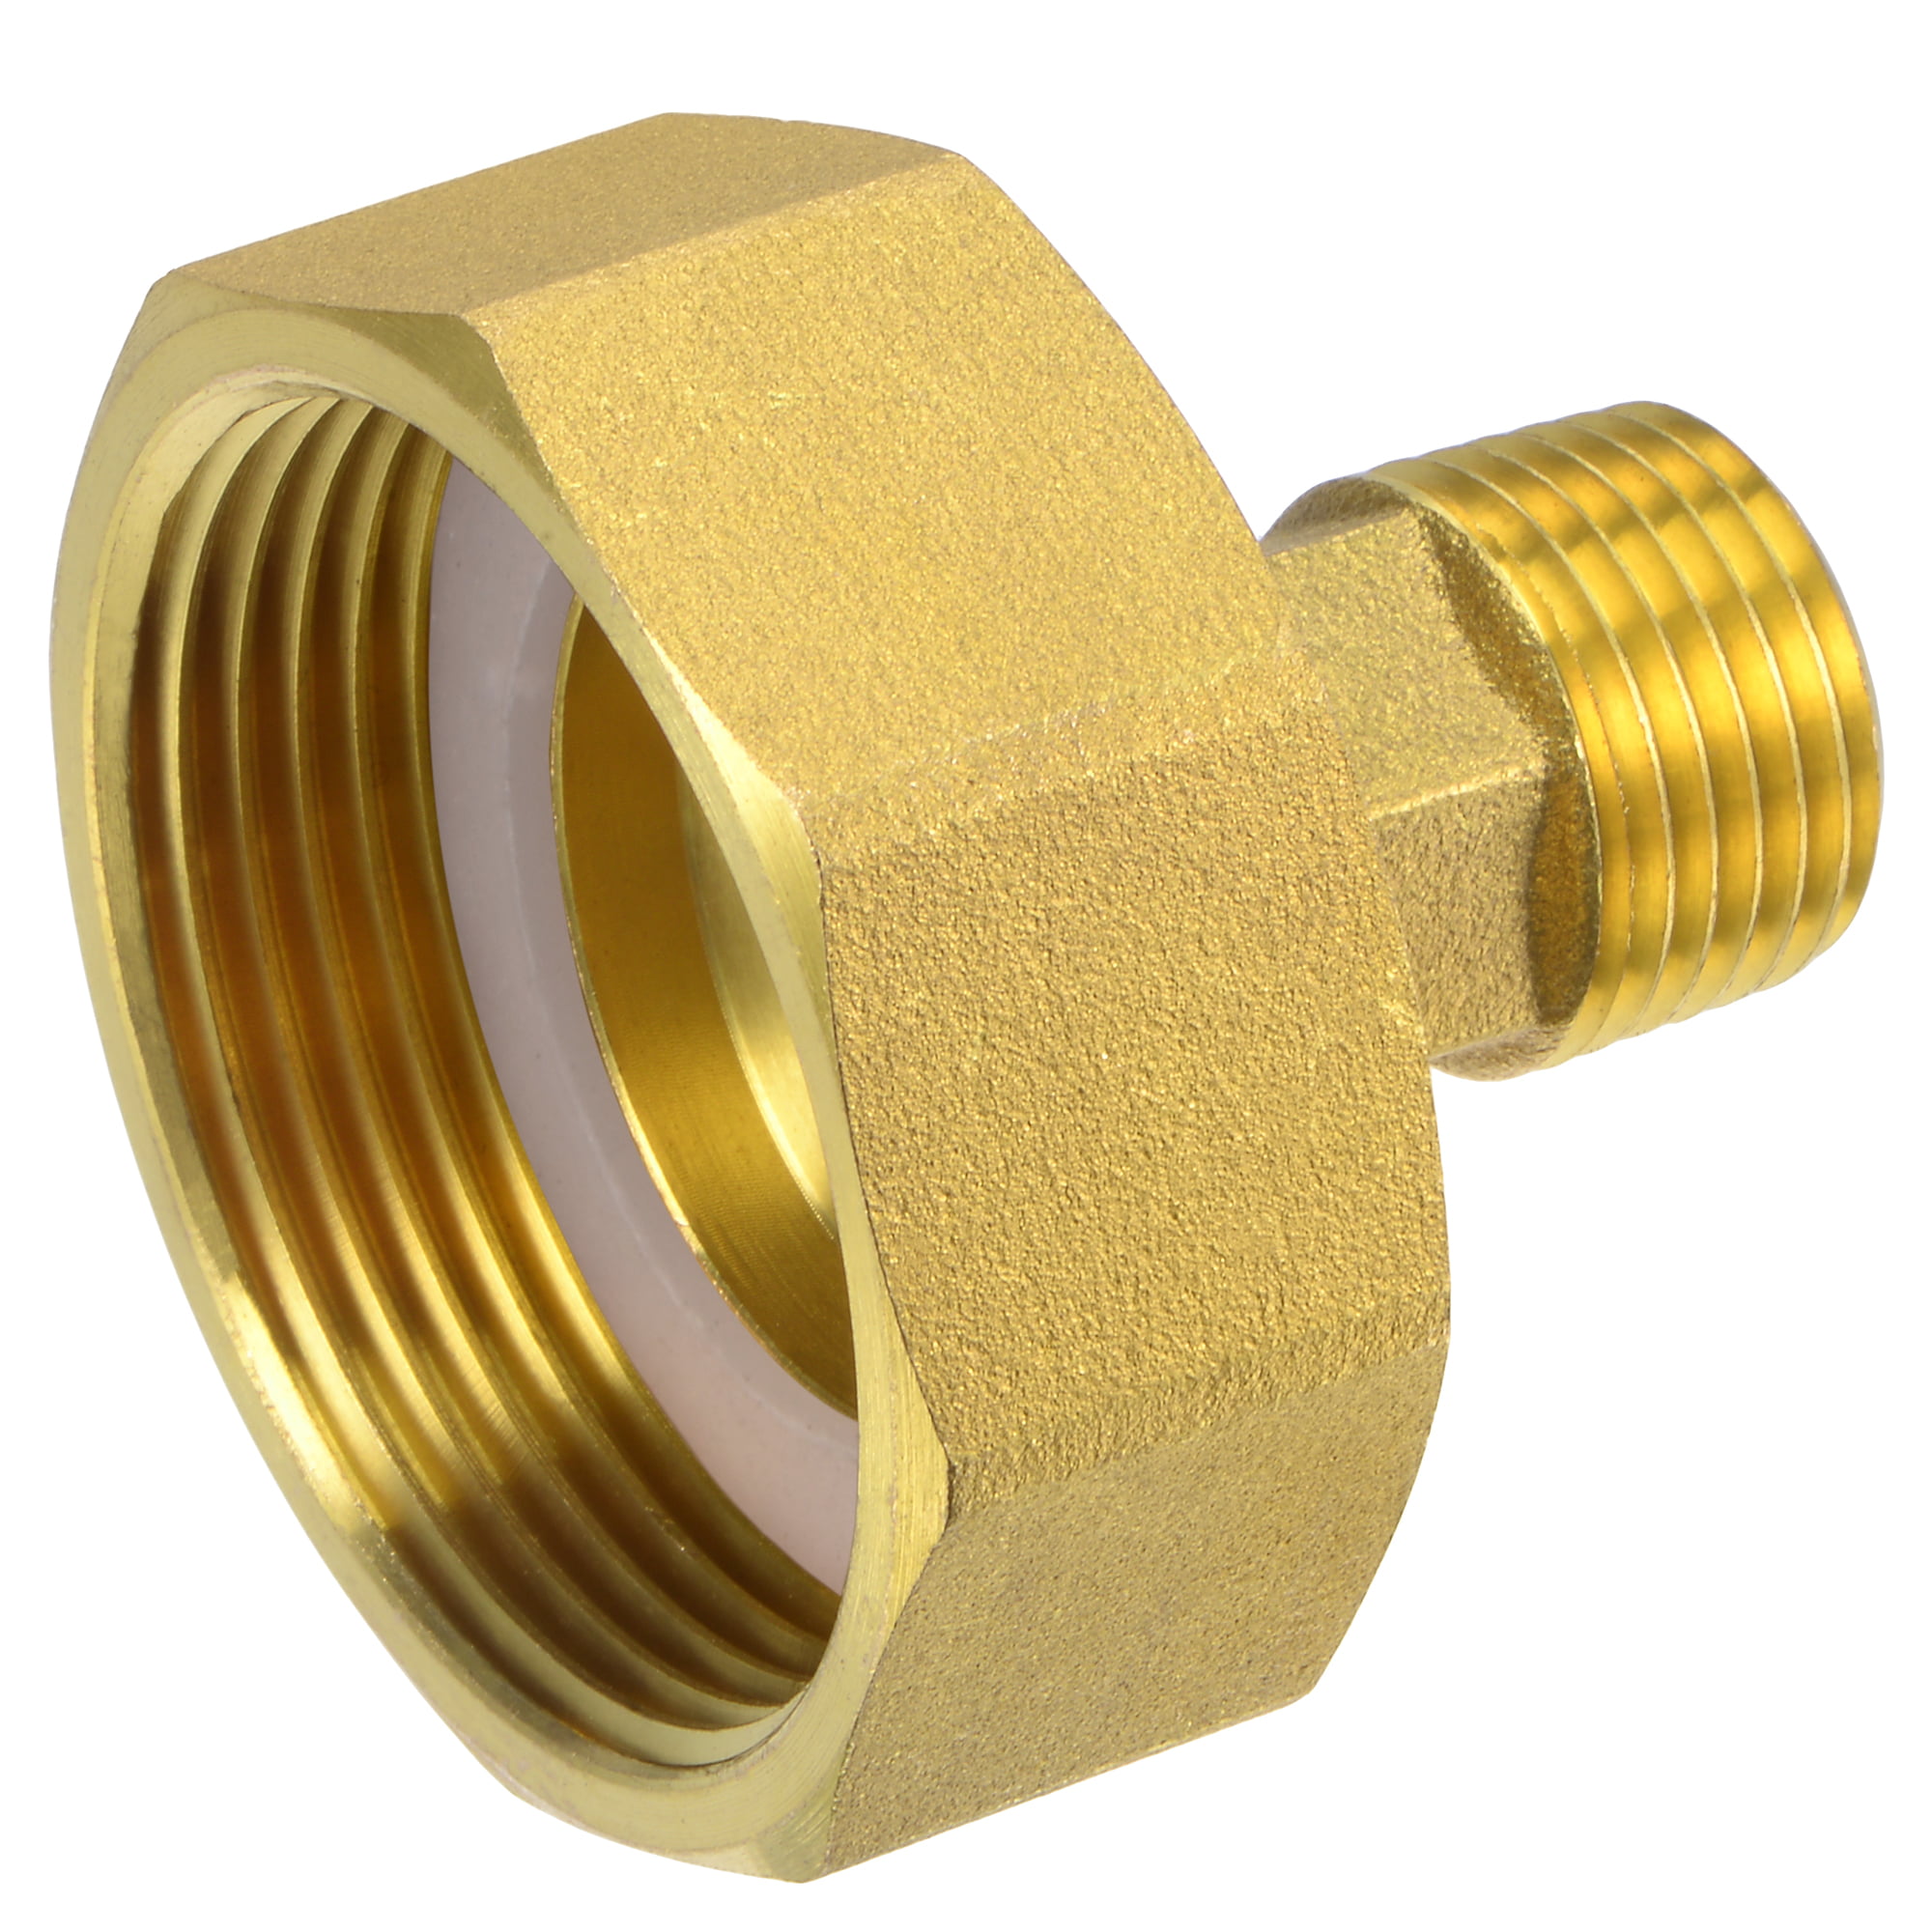 Full Brass G1/2" Male x G1/2" Female Thread Adapter Connector Pipe Fitting 